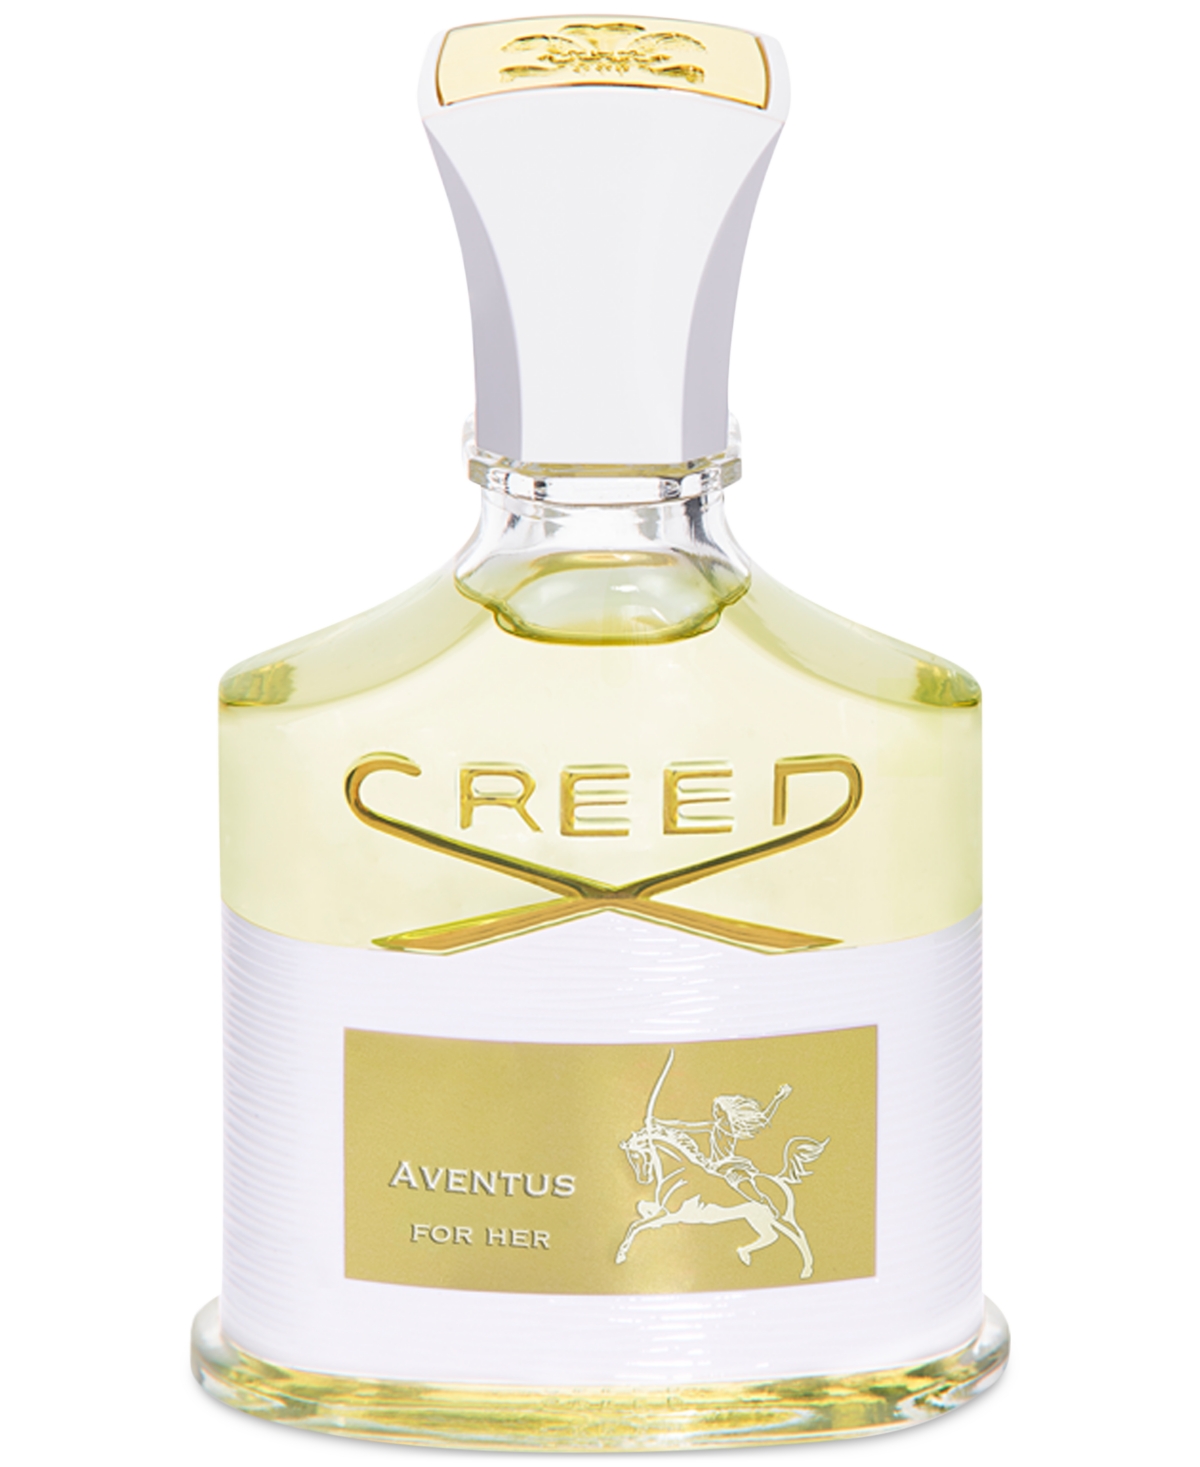 Creed Aventus For Her, 2.5 Oz.